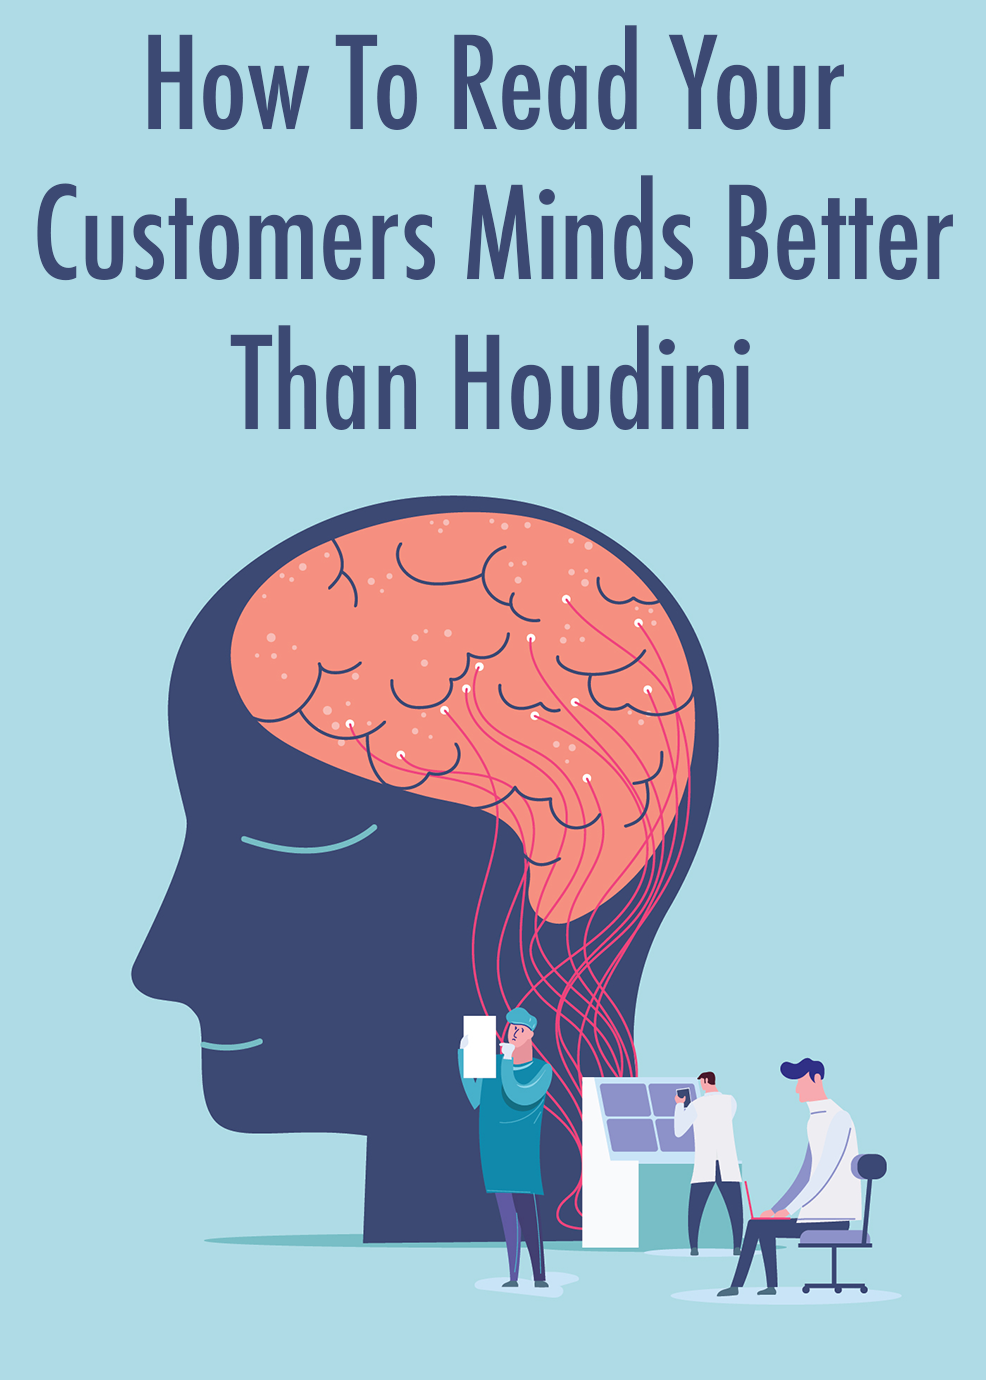 How To Read Your Customers' Minds Better Than Houdini